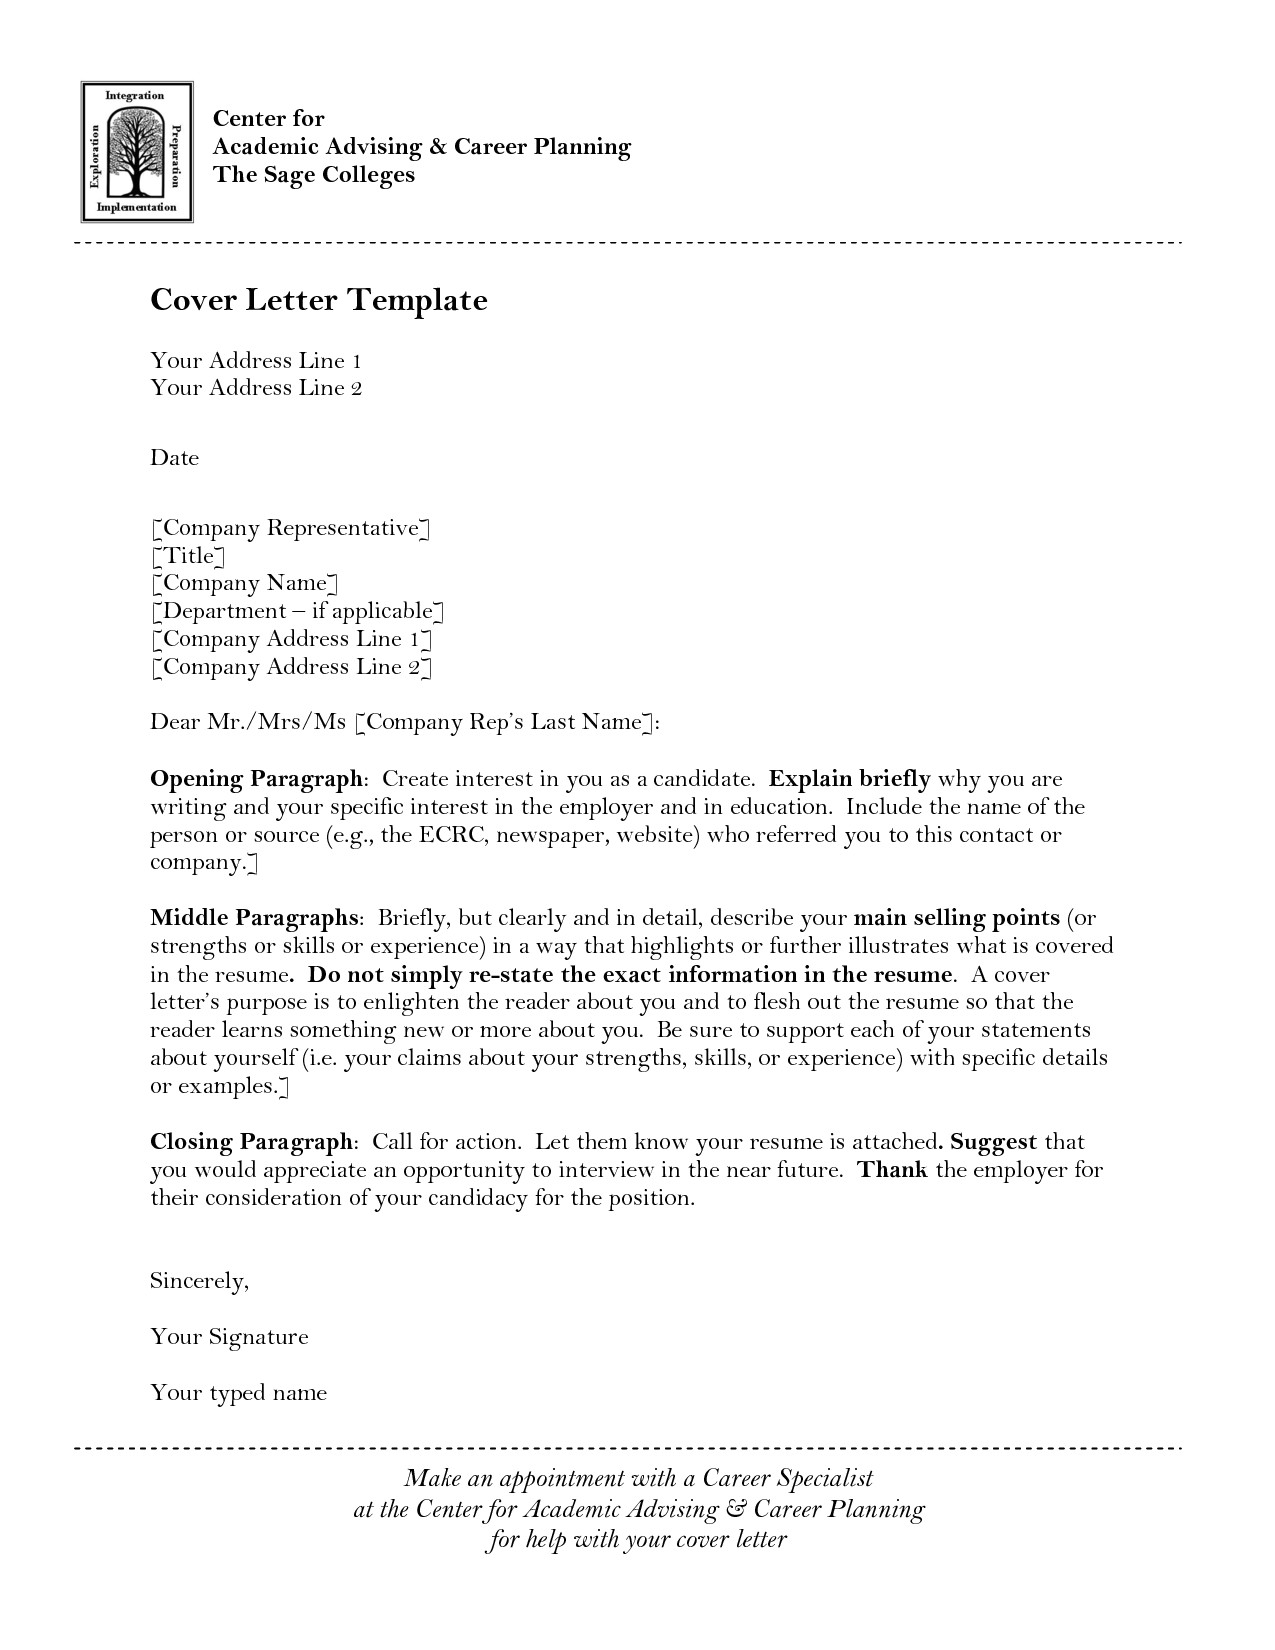 sample application letter for teaching position in college